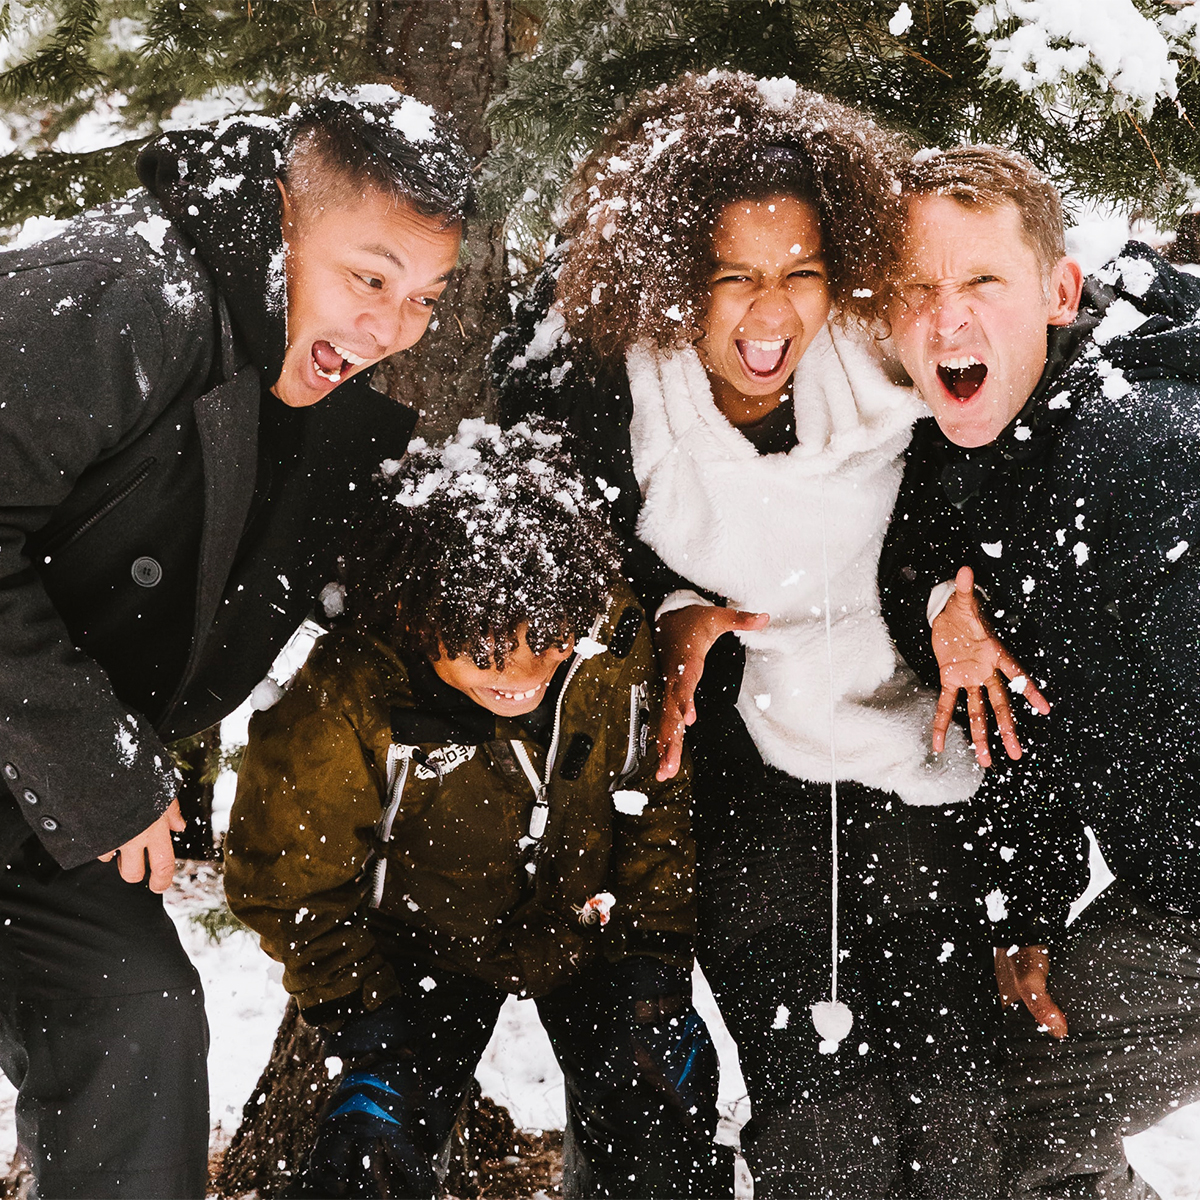 Four adolescent boys laughing in the snow